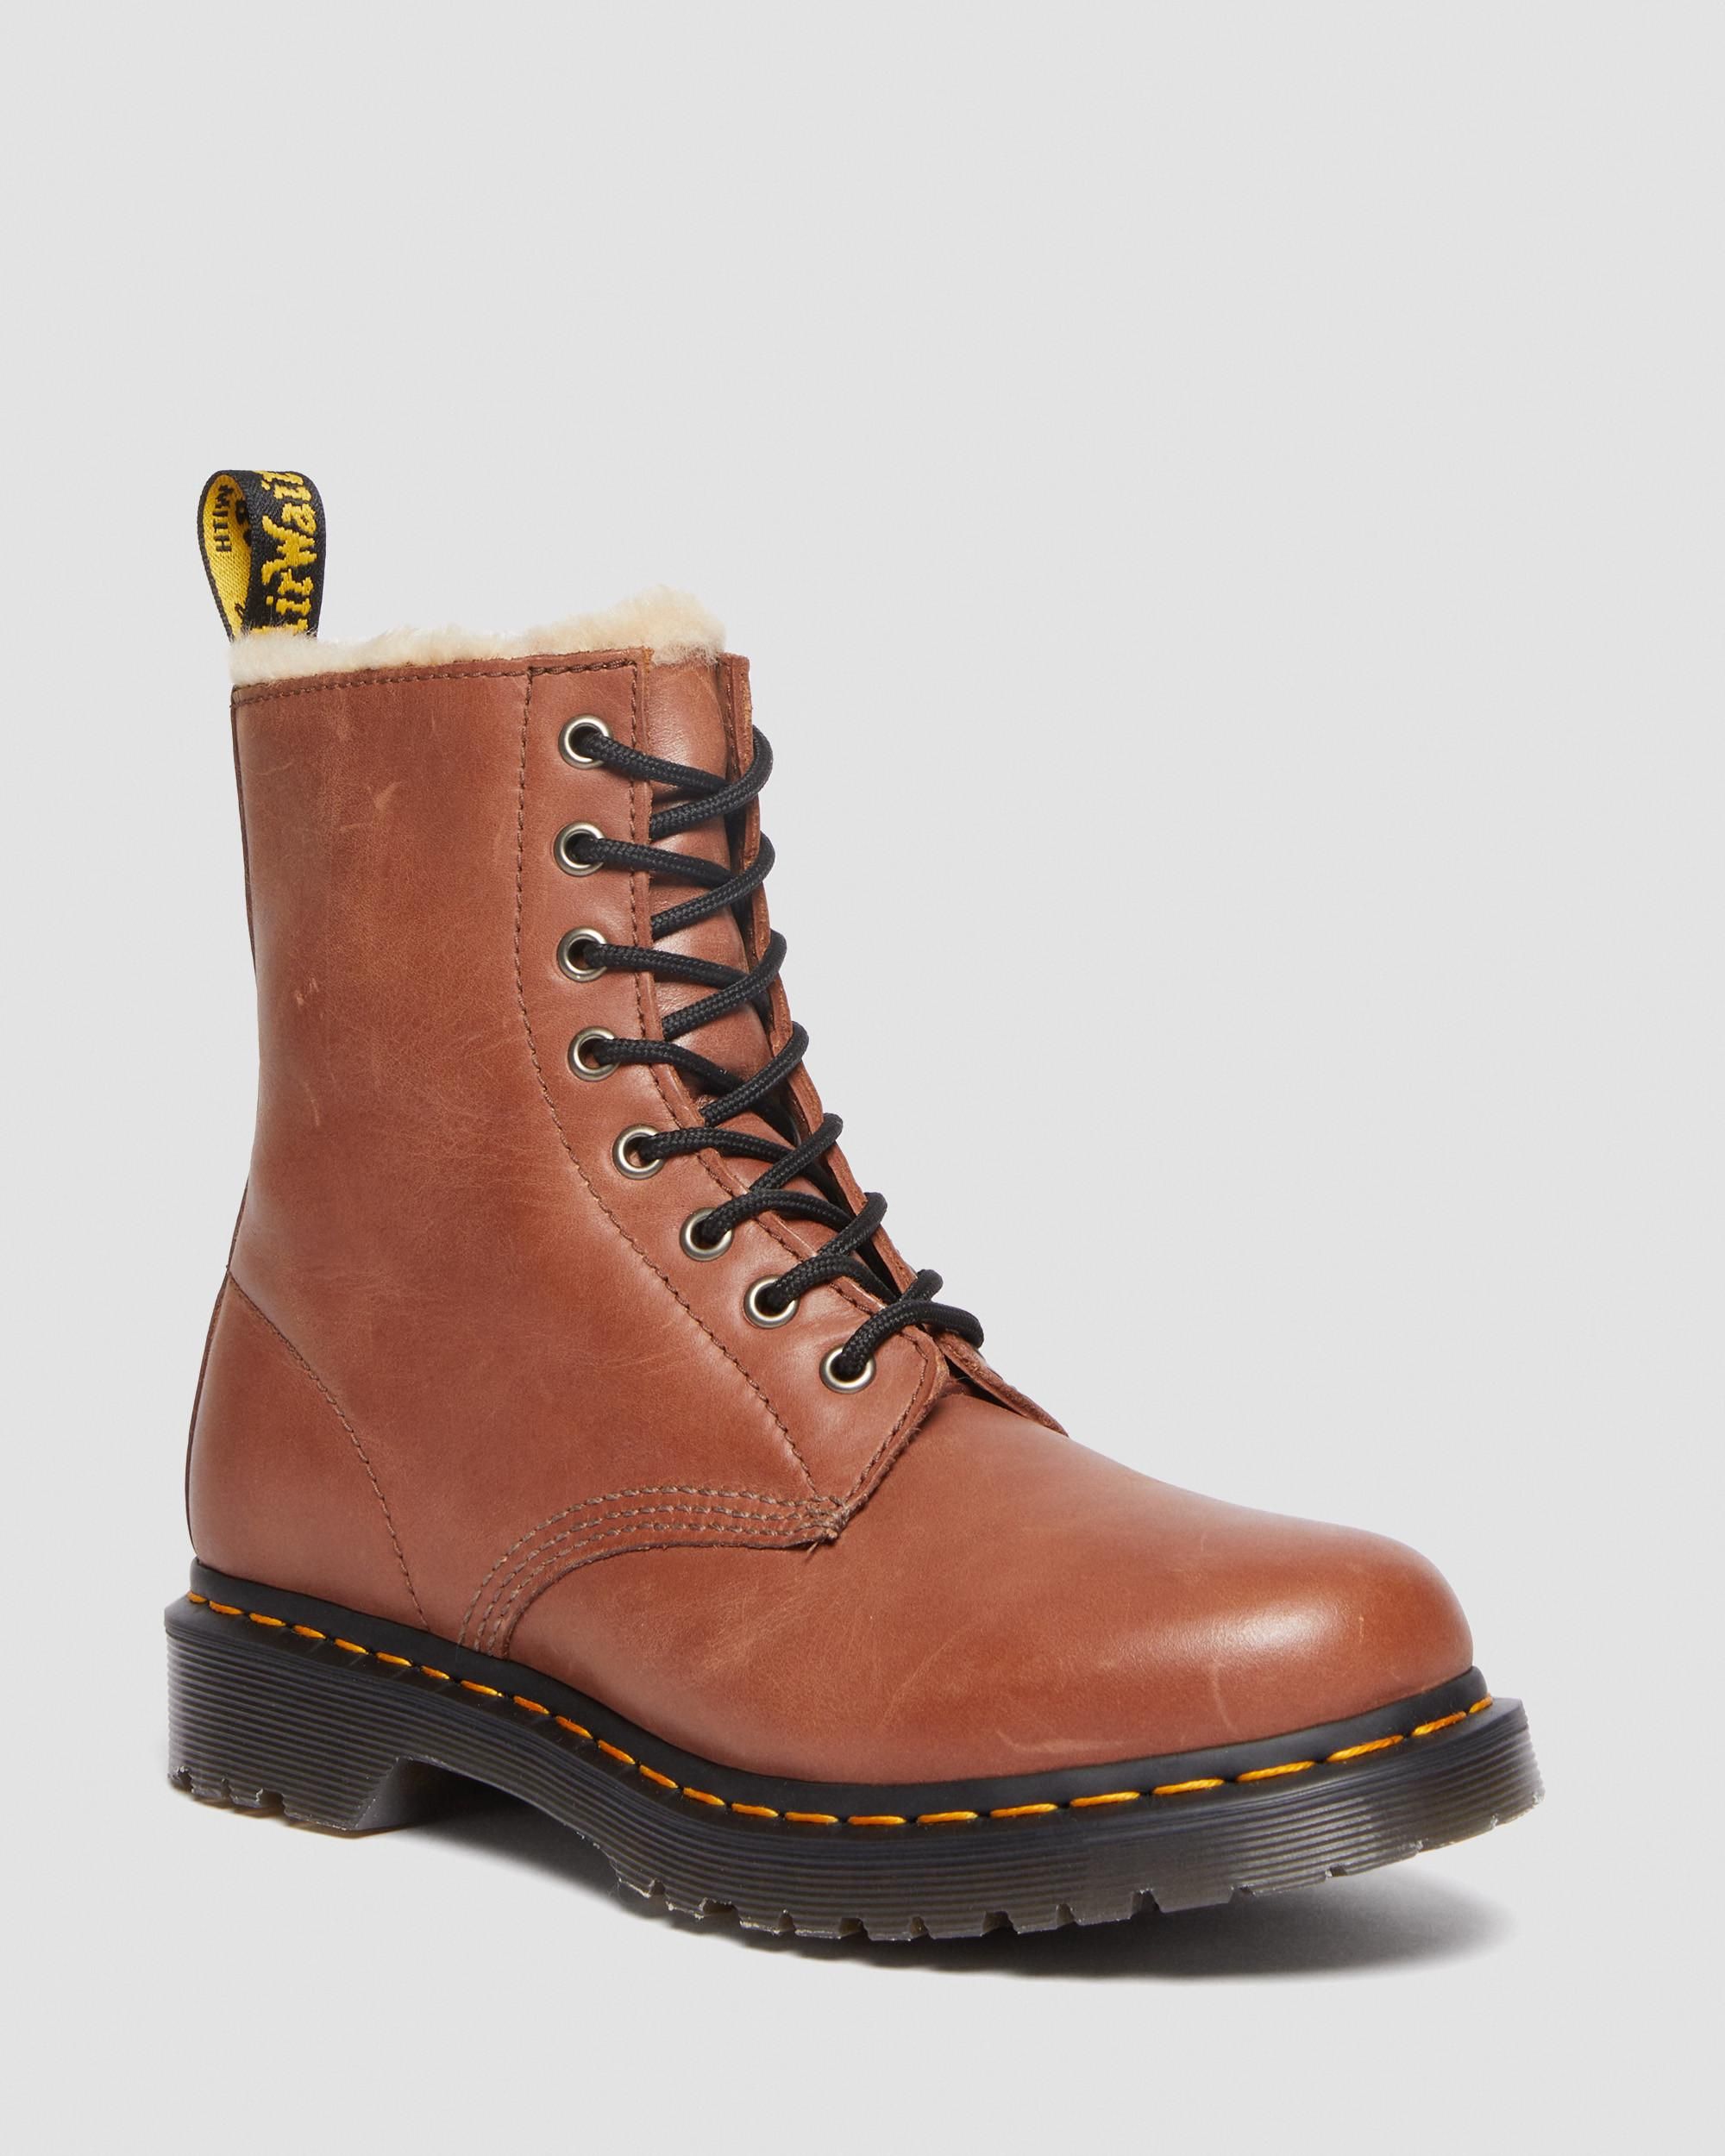 1460 Serena Women's Faux Fur-Lined Leather Boots | Dr. Martens